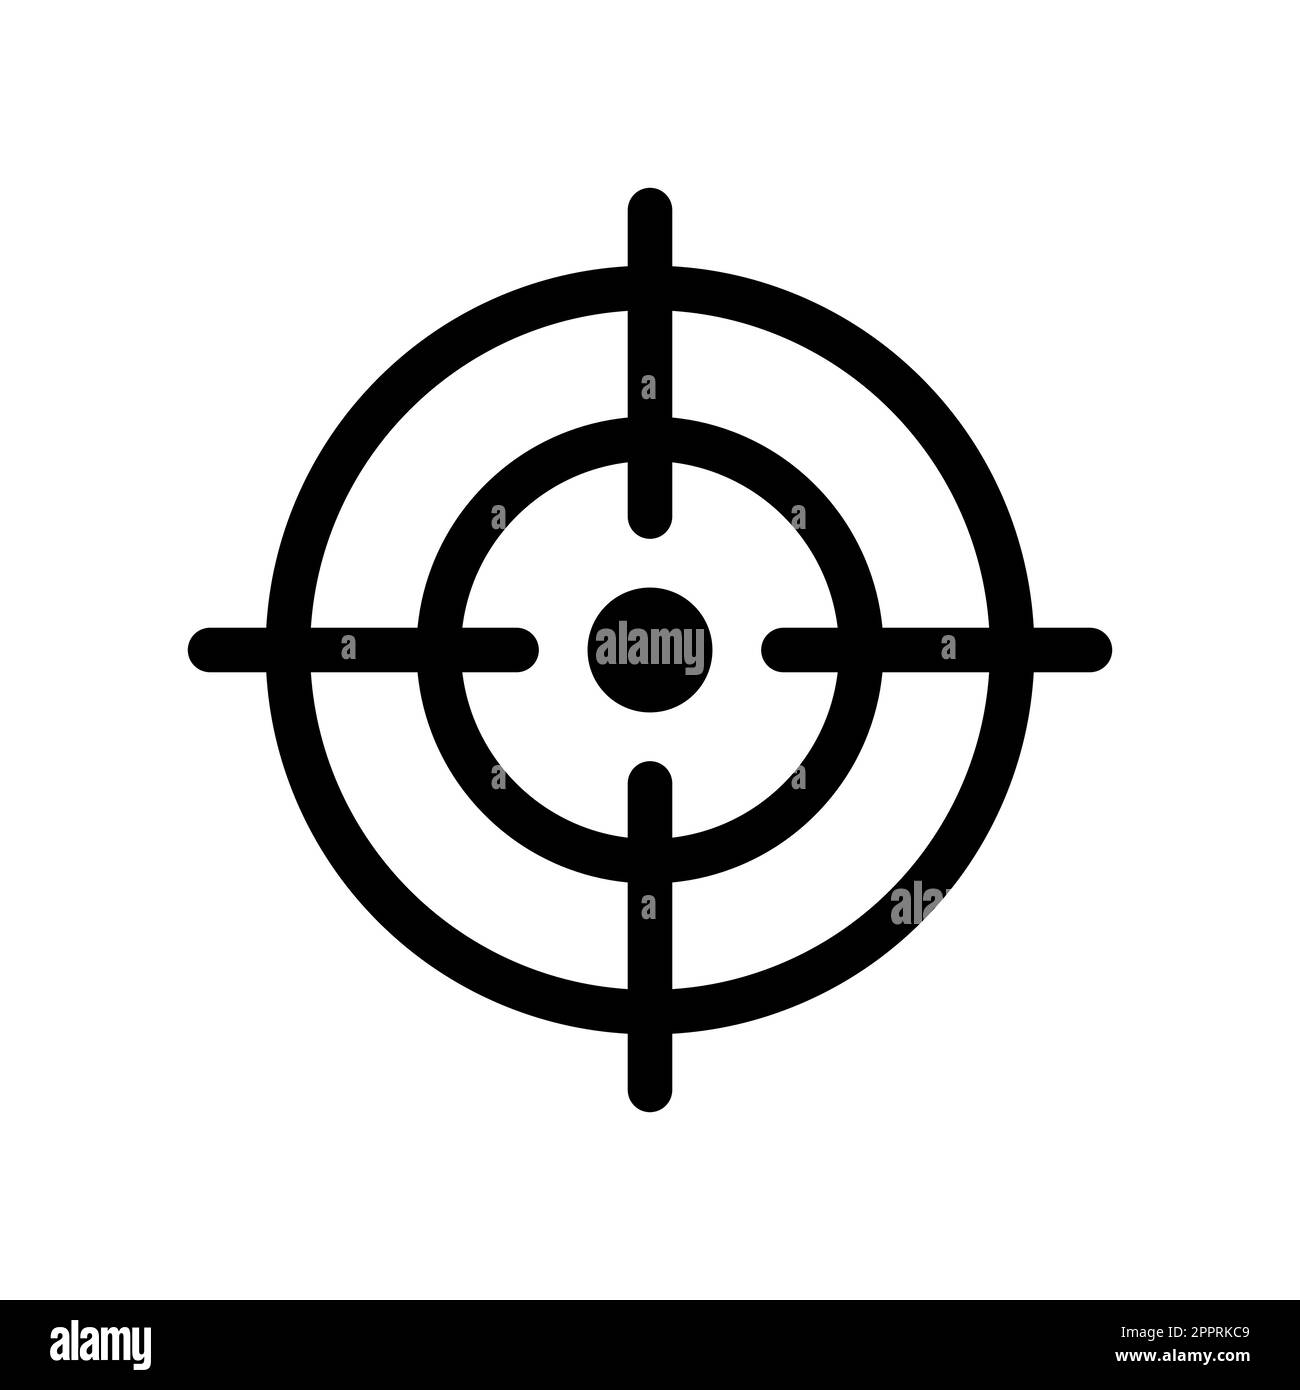 Target black vector icon on white background Stock Vector